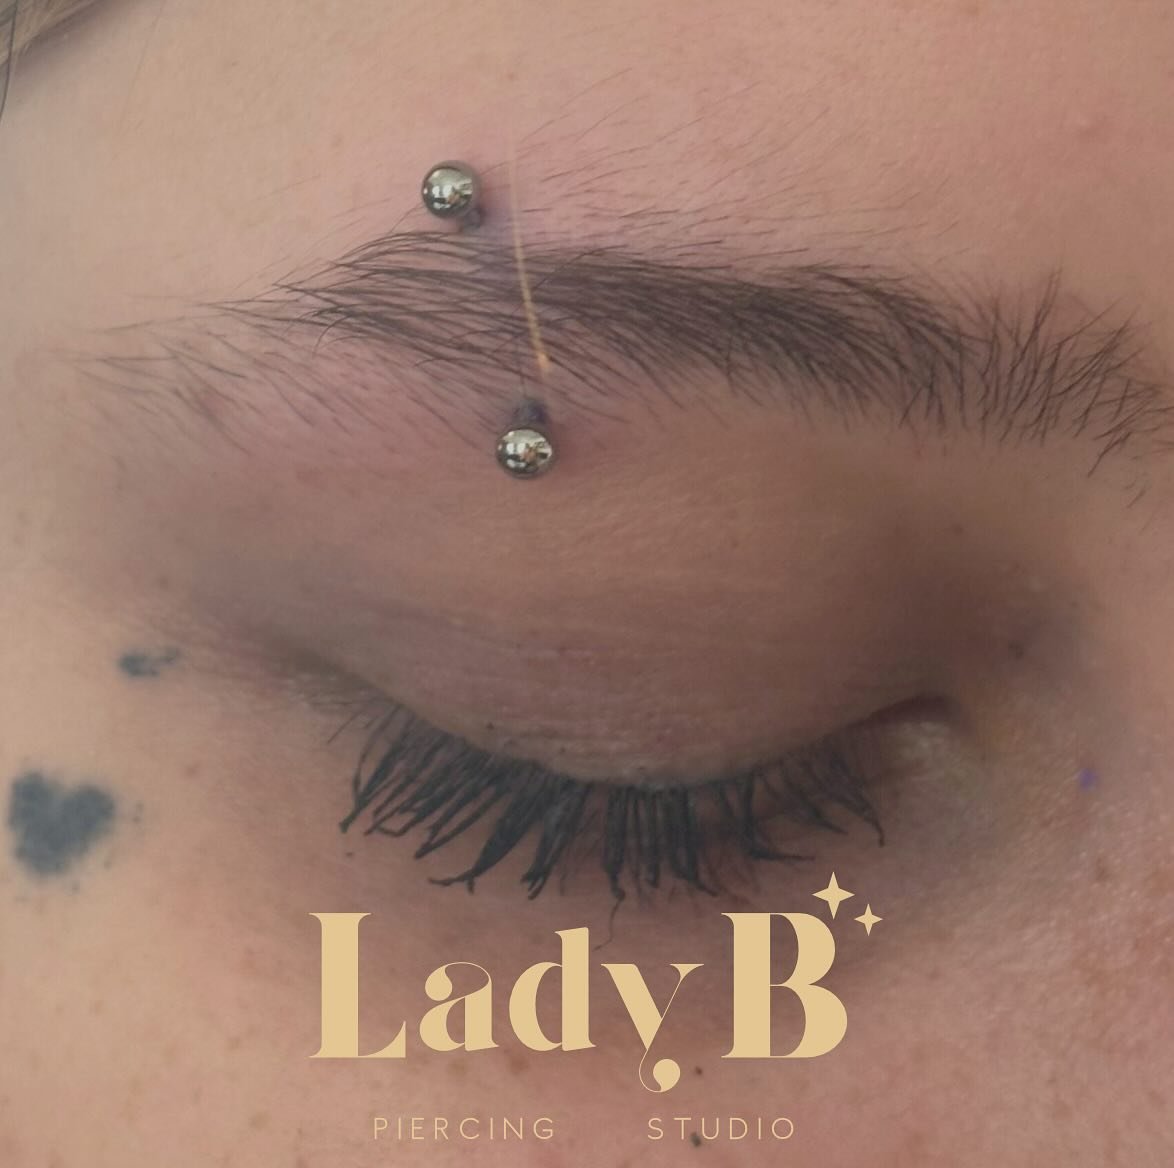 And another eyebrow from yesterday🤍 These are definitely making a comeback! 
Piercing by Erin at @ladybpiercings